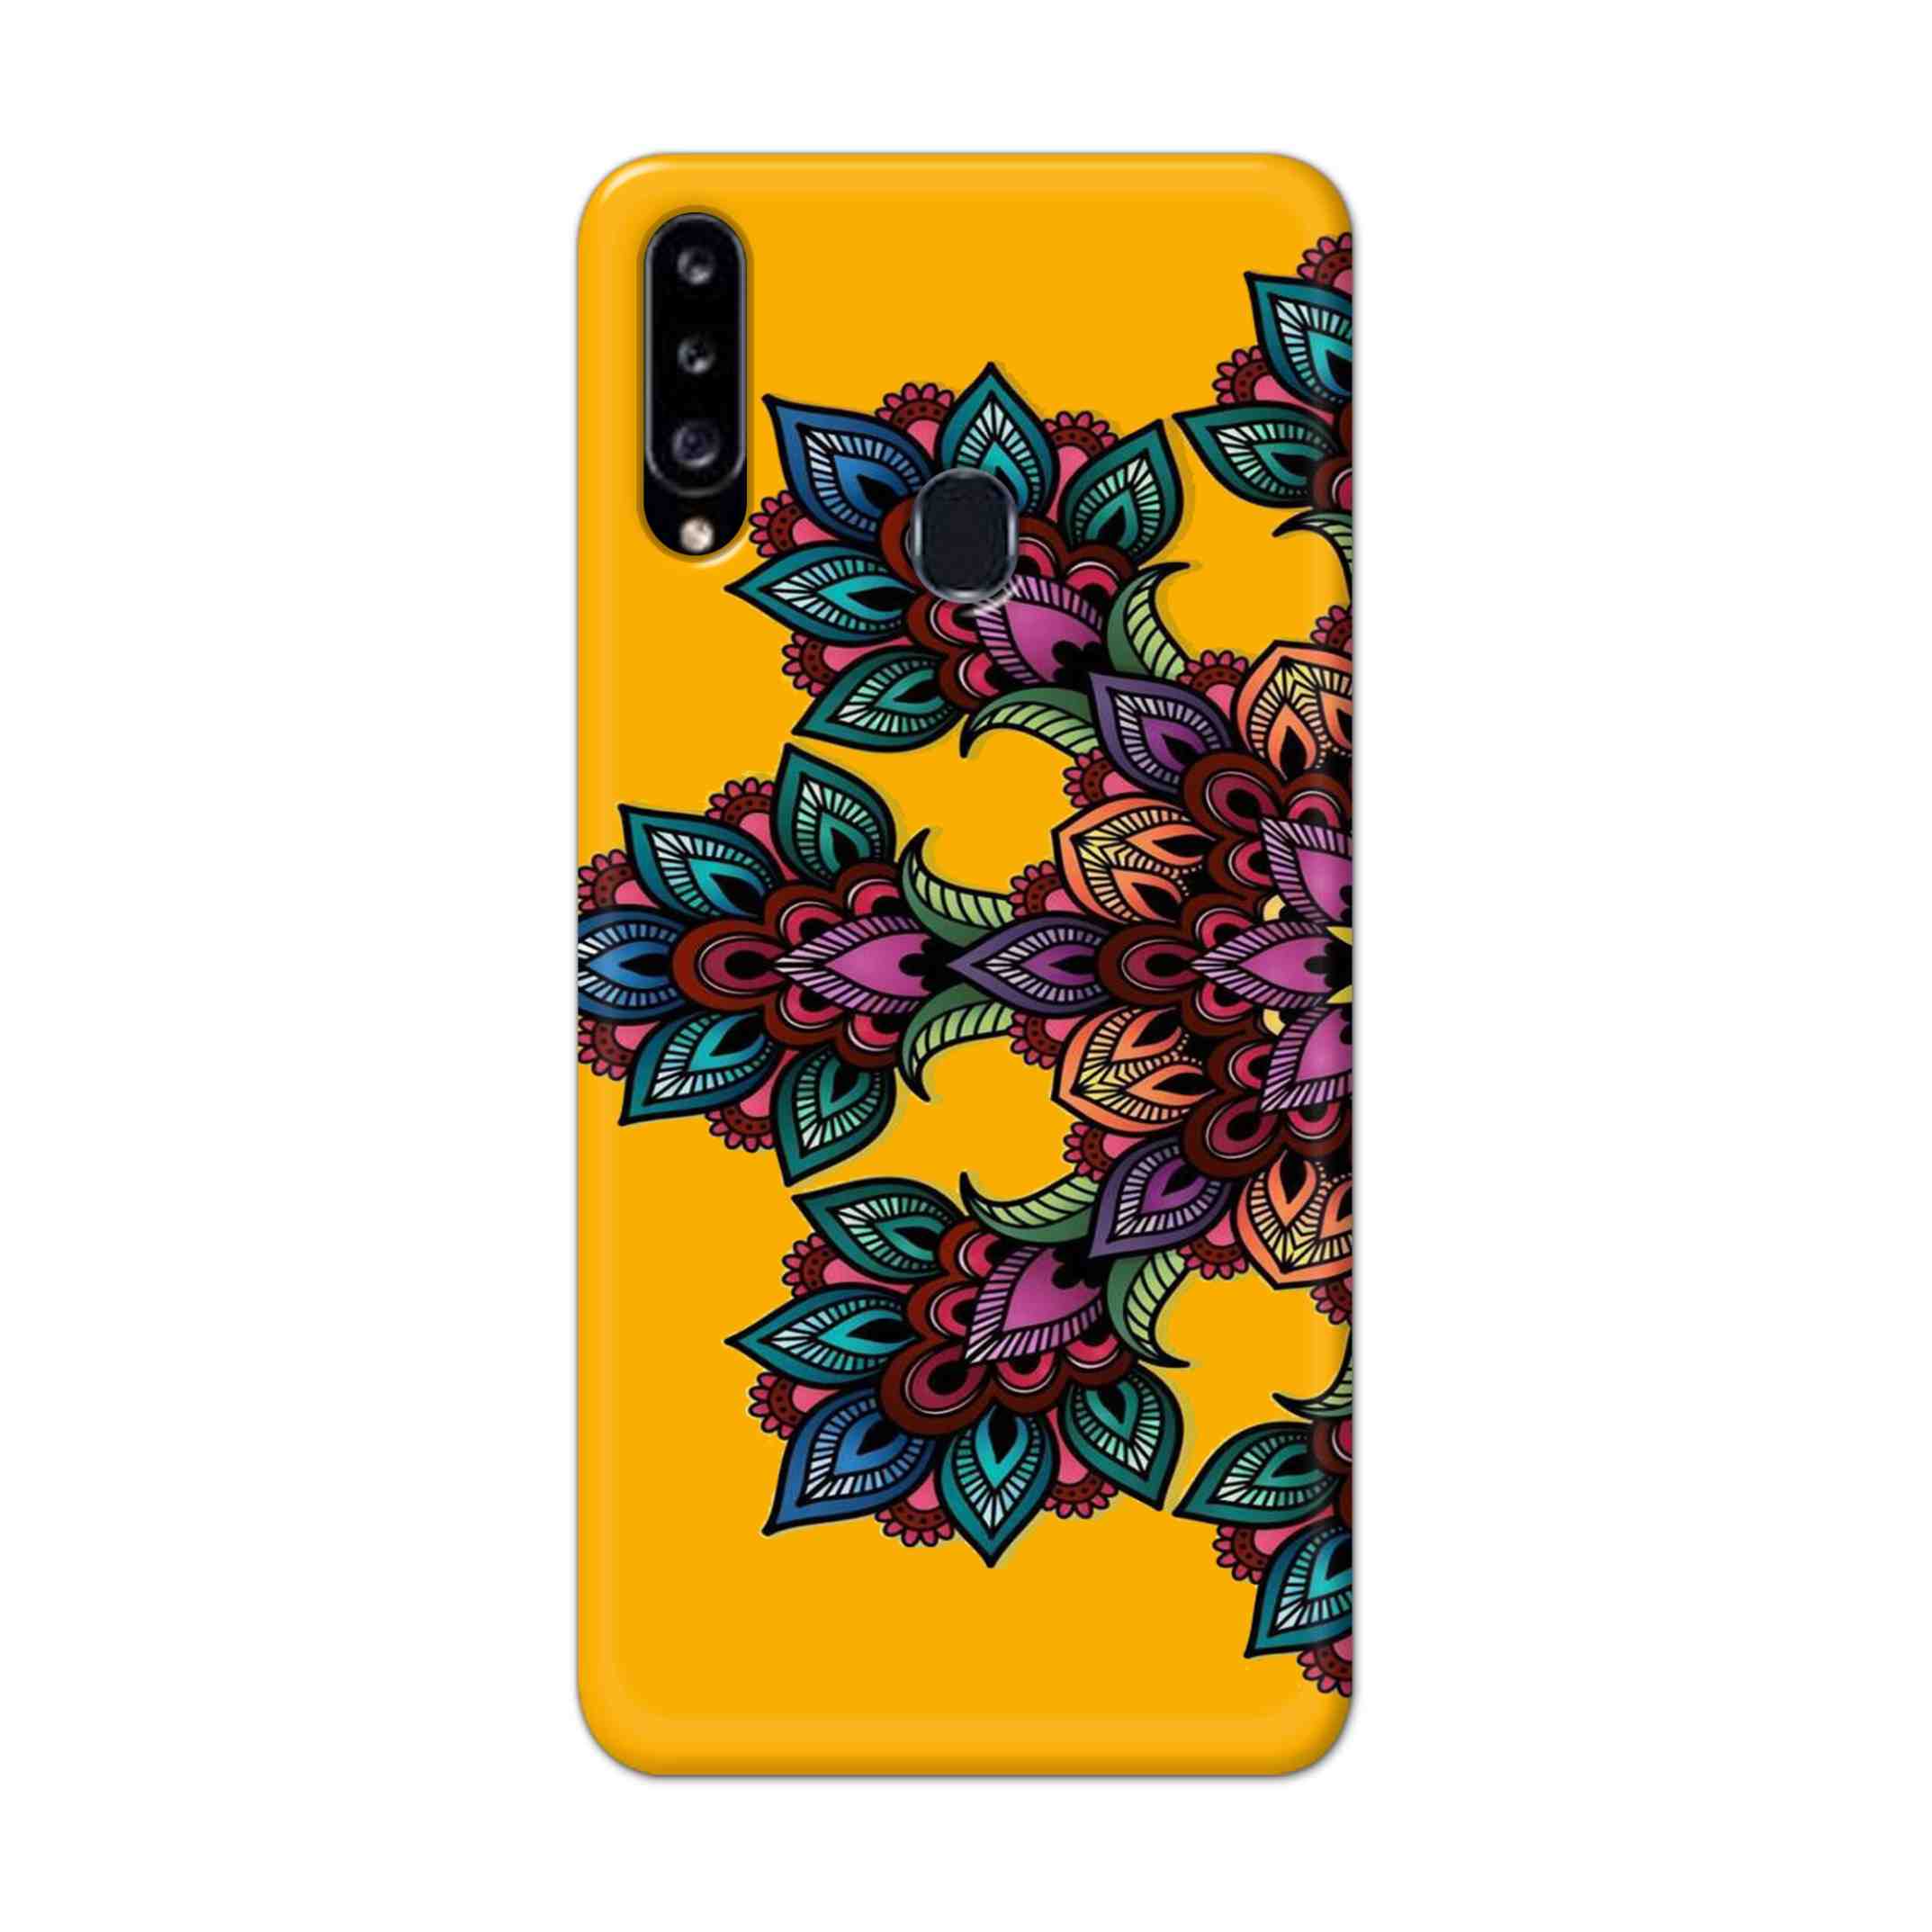 Buy The Celtic Mandala Hard Back Mobile Phone Case Cover For Samsung Galaxy A21 Online